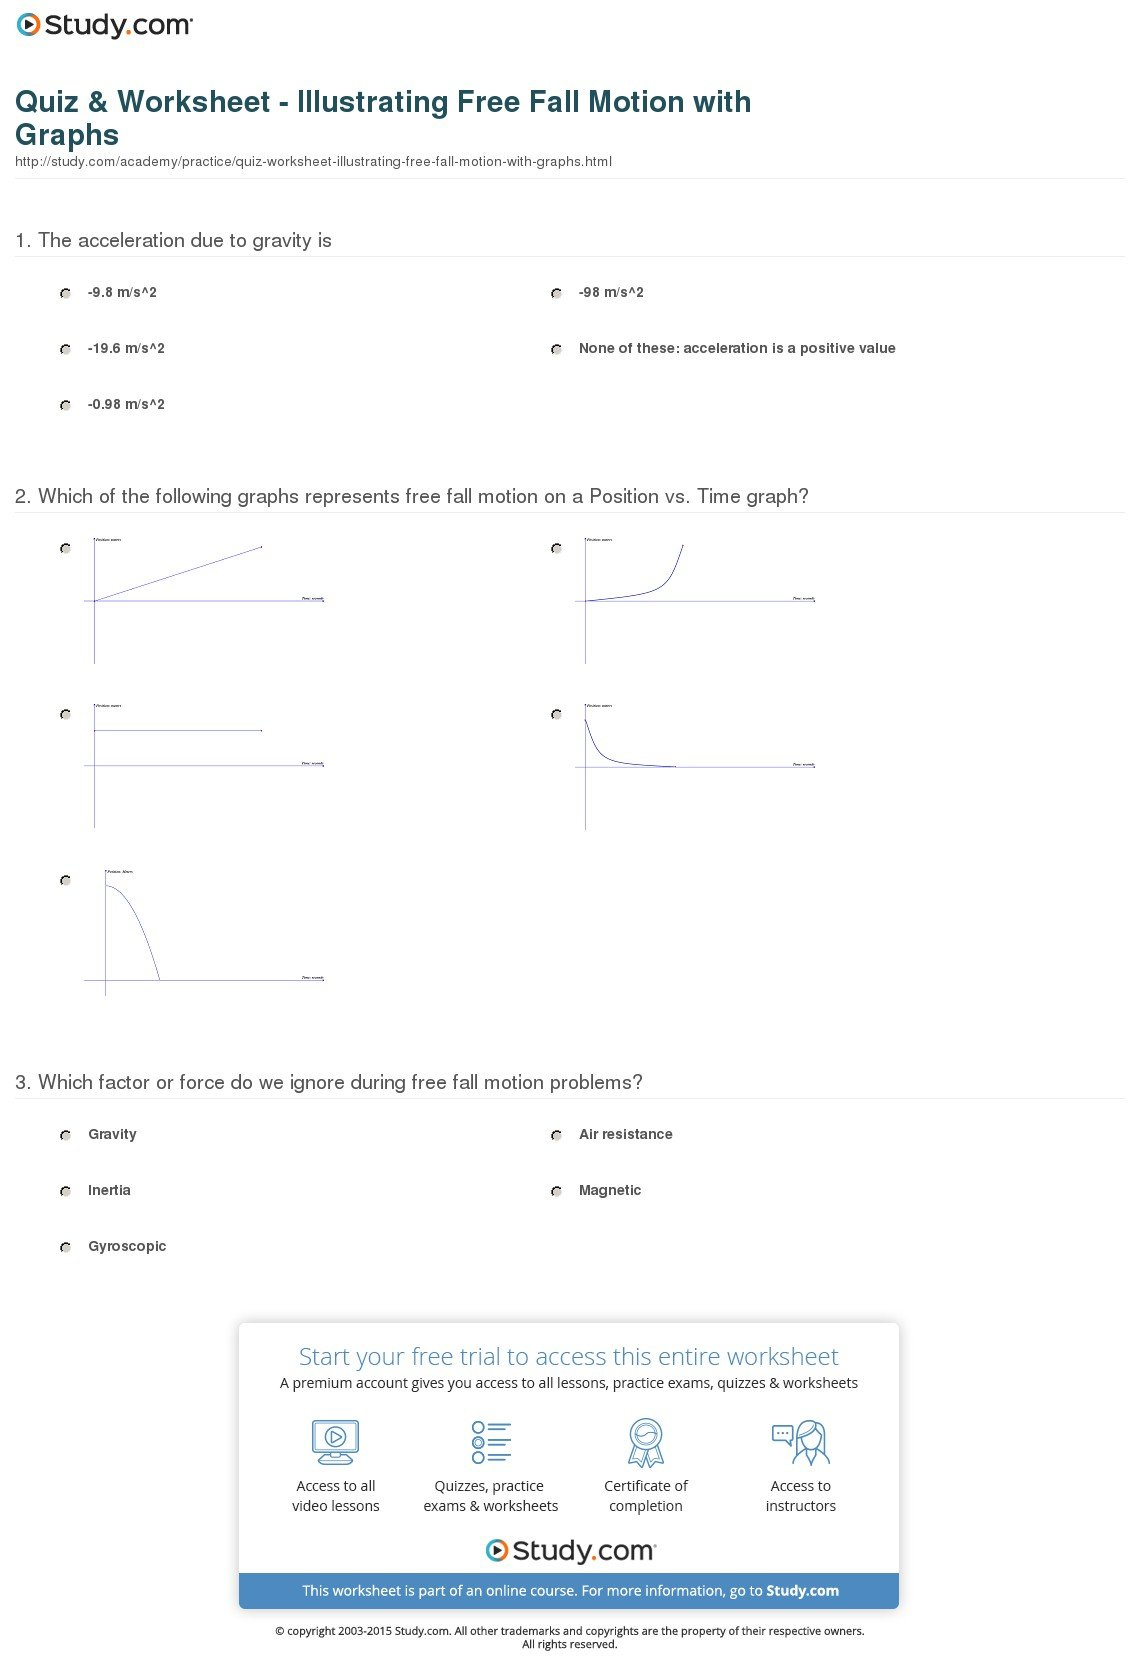 Quiz  Worksheet  Illustrating Free Fall Motion With Graphs  Study For Acceleration And Free Fall Worksheet Answers